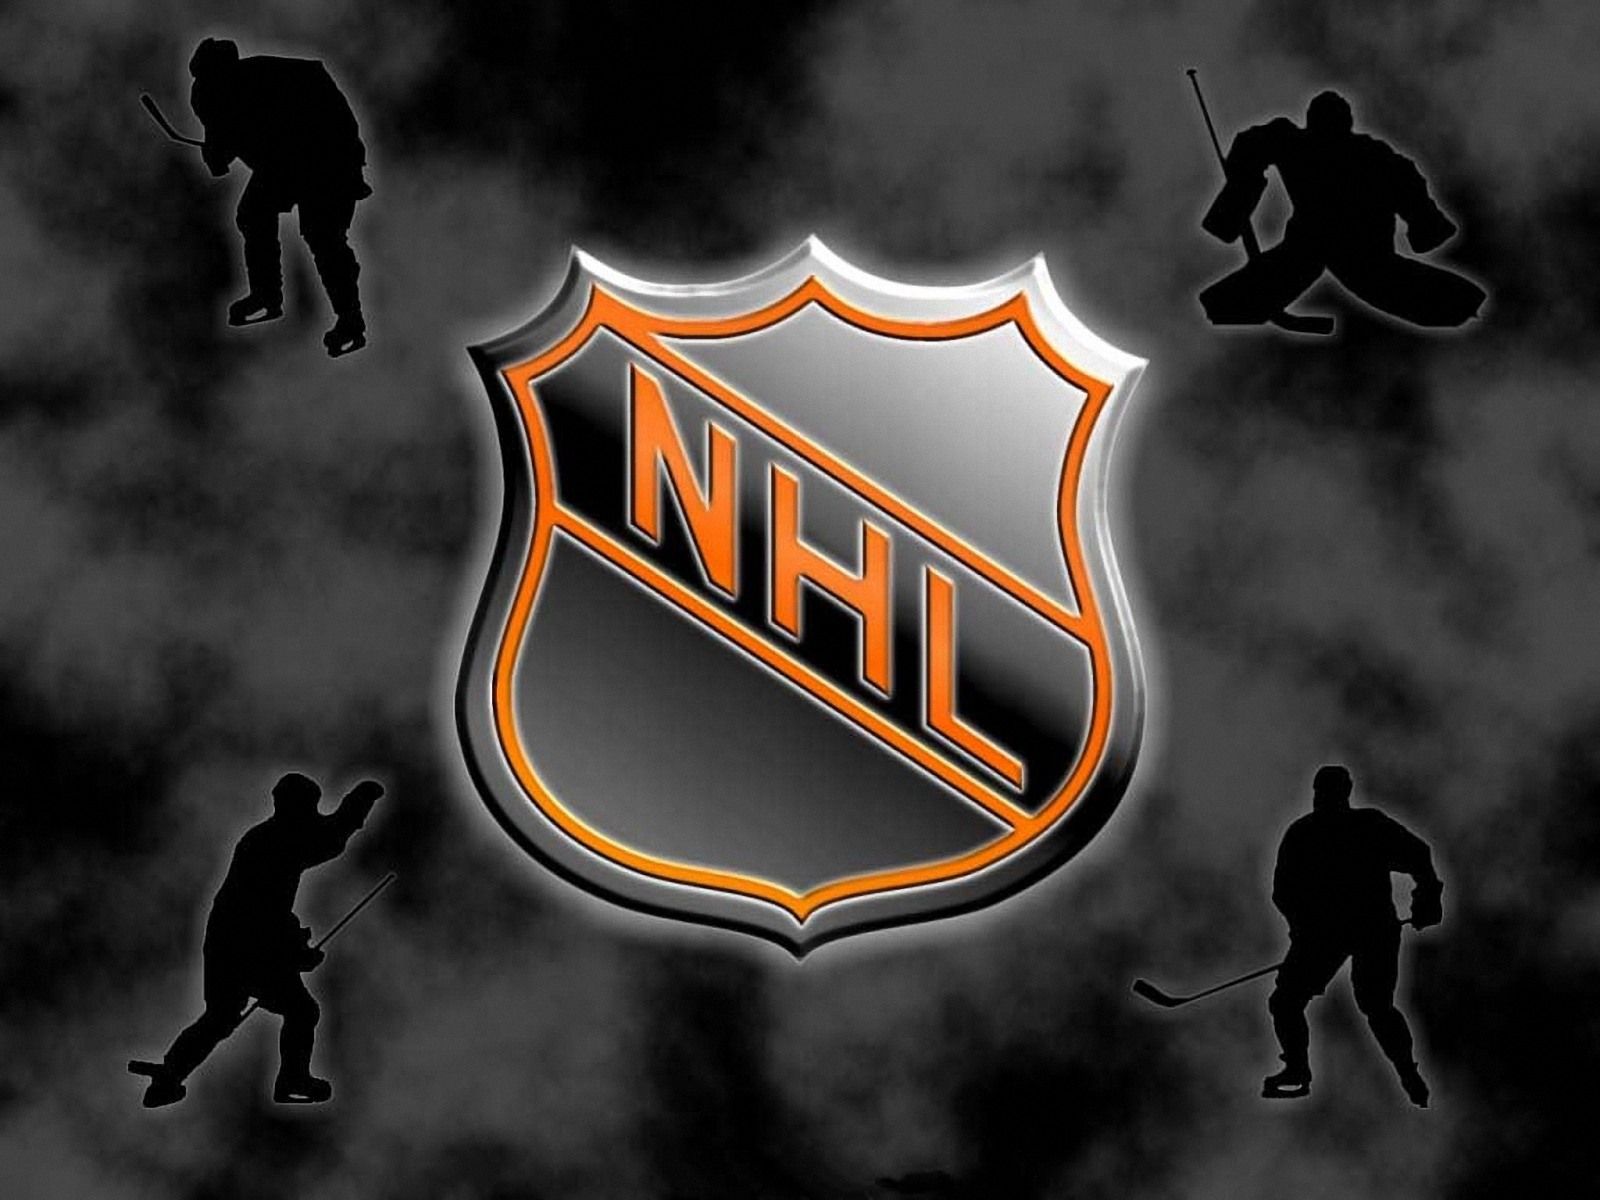 Ice Hockey NHL wallpaper 1600x1200 Wallpapers 1600x1200 Wallpapers